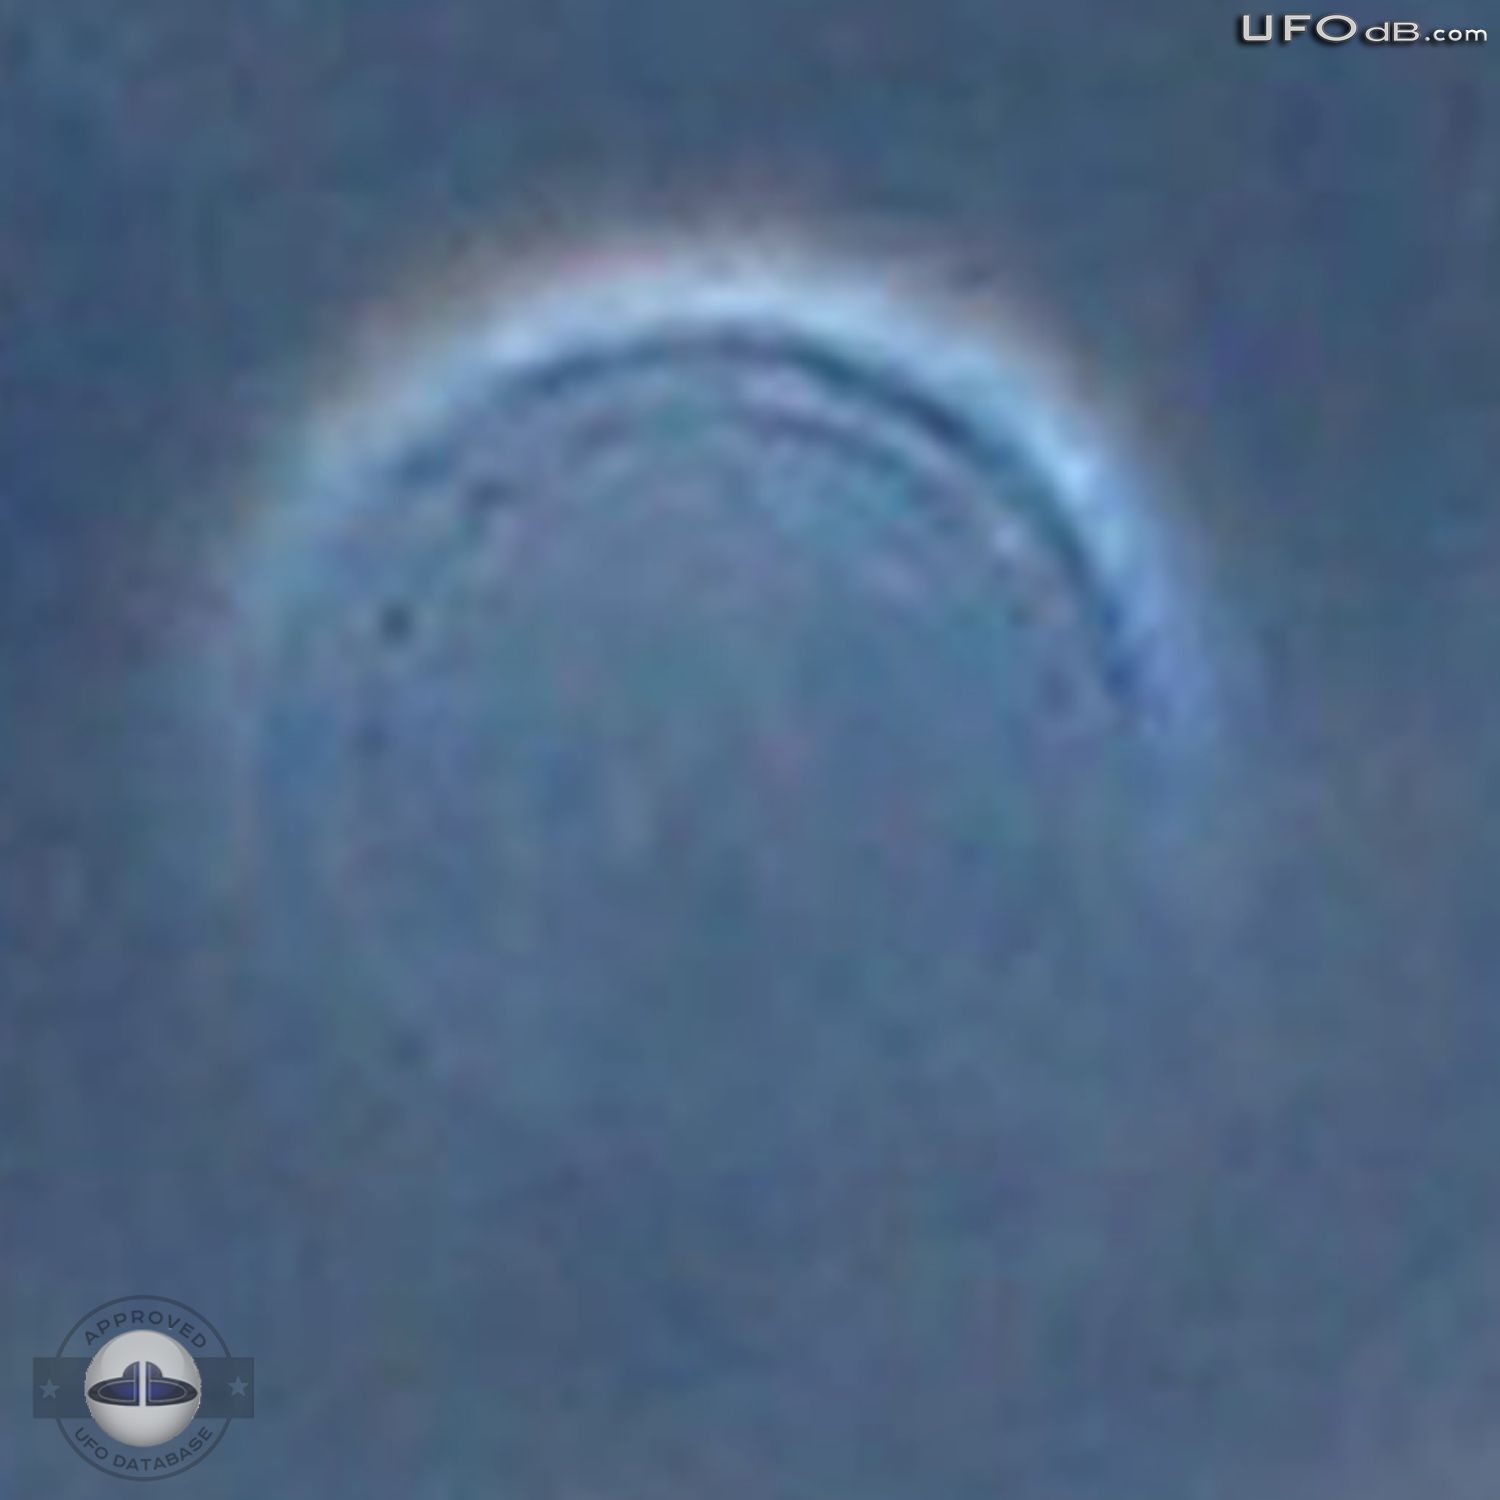 Large UFO coming through a Cloud in Las Vegas Nevada USA | May 13 2011 UFO Picture #334-6